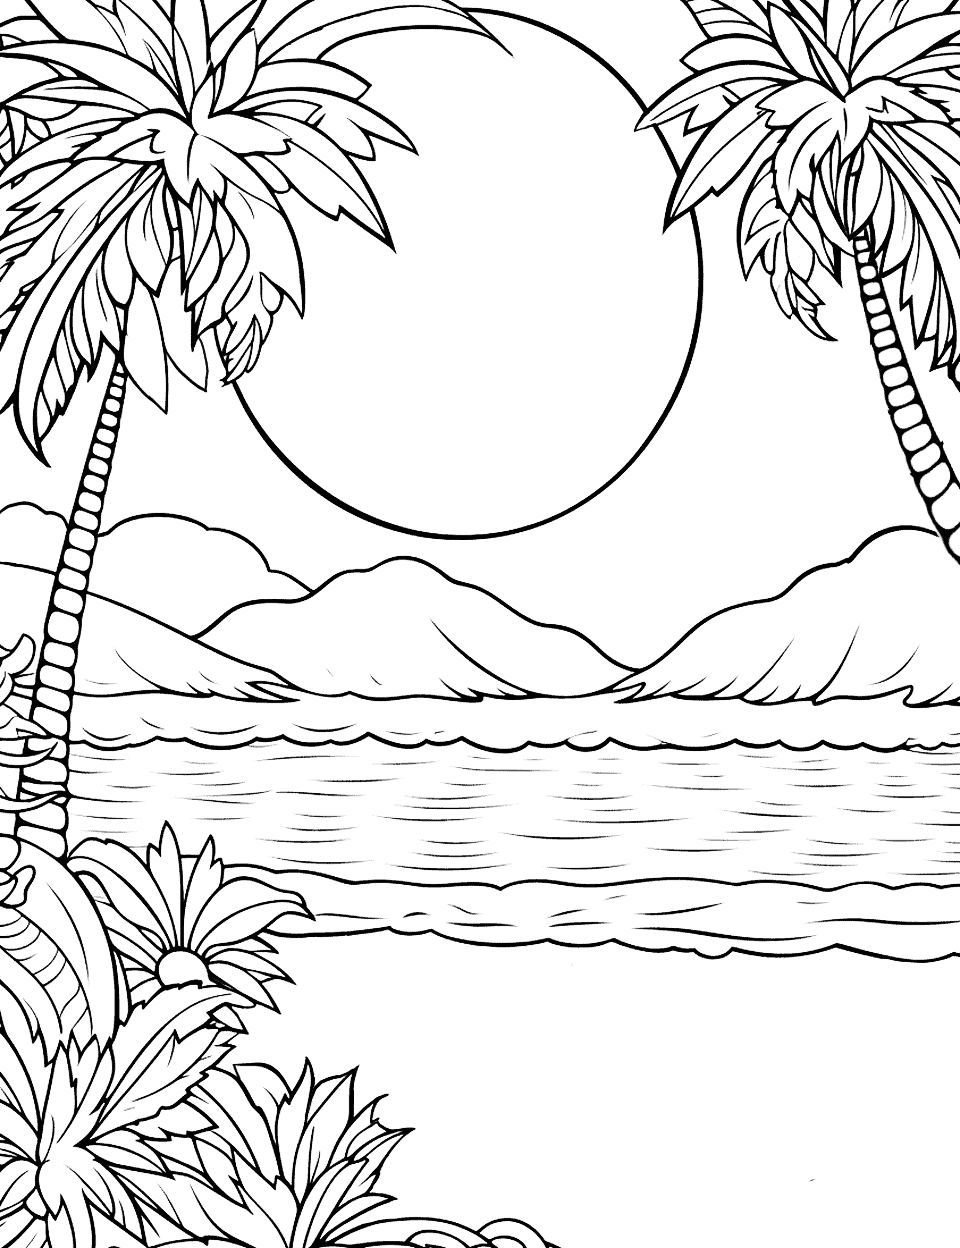 Moonlit Tropical Paradise Adult Coloring Page - A detailed tropical beach scene under a moonlit sky, complete with palm trees.